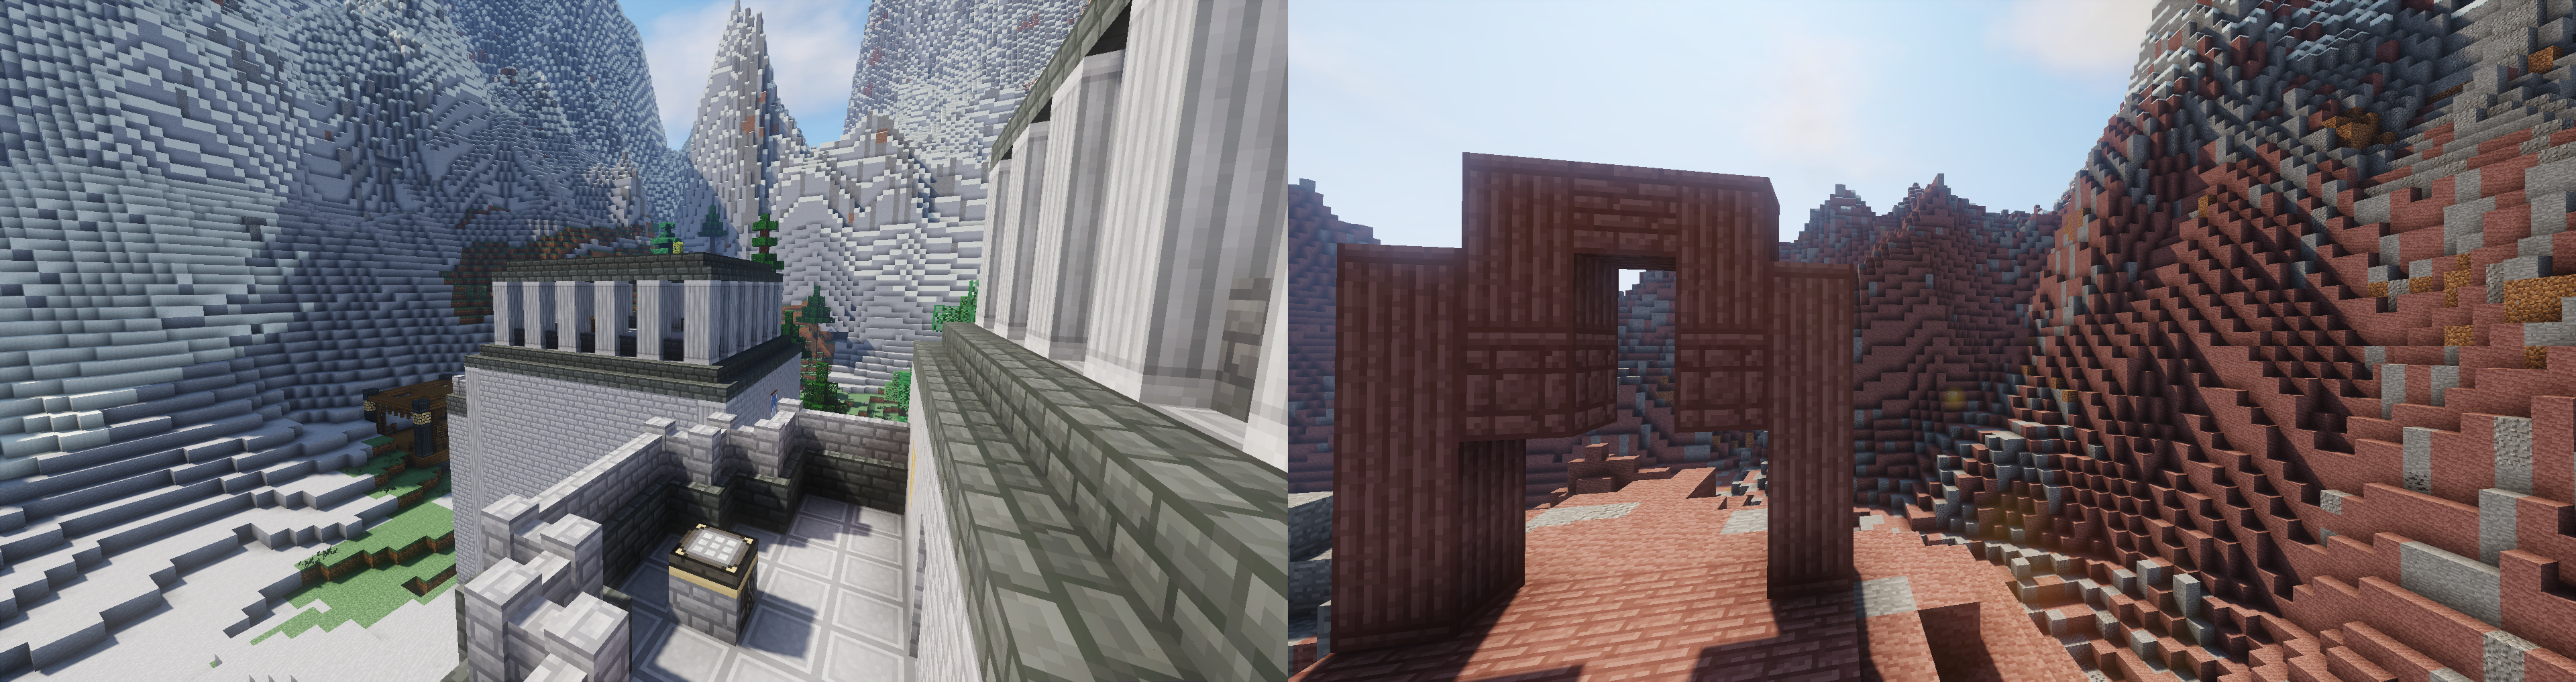 128x][64x] [1.5] KoP Texture Pack Classic - Resource Packs - Mapping and  Modding: Java Edition - Minecraft Forum - Minecraft Forum